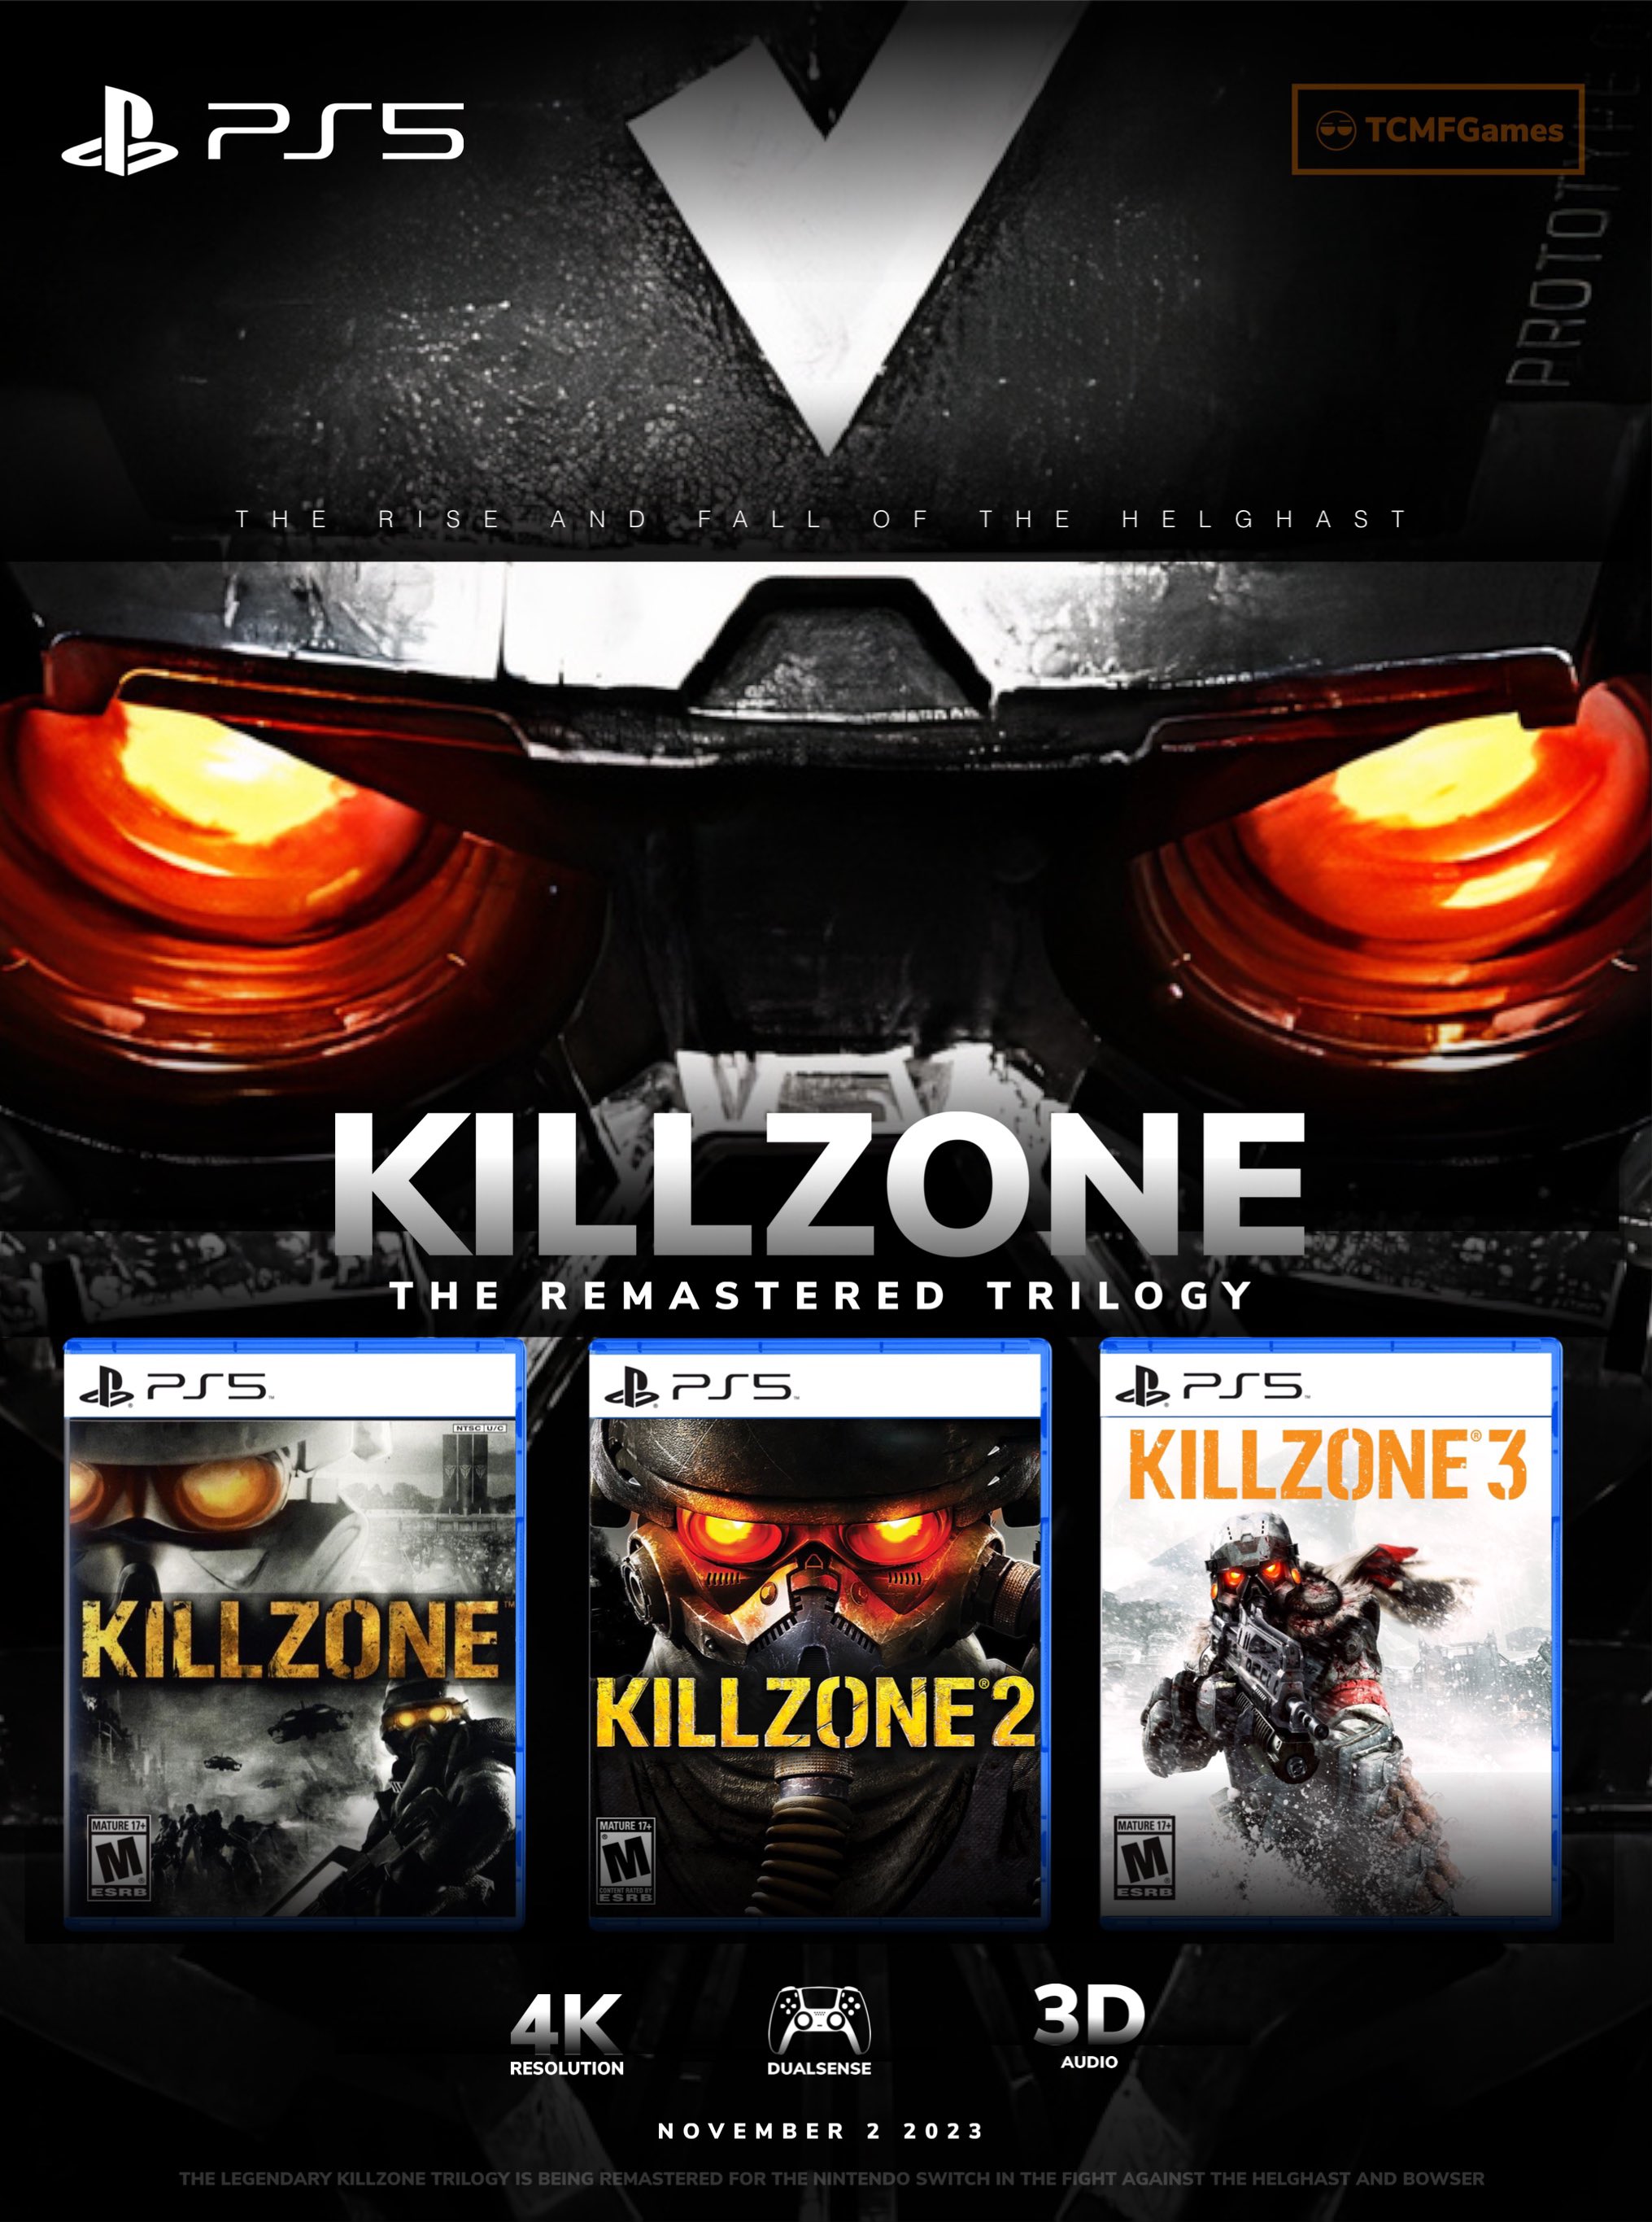 In Theory: What Kind of Specs Will PS5 Require To Run The Killzone